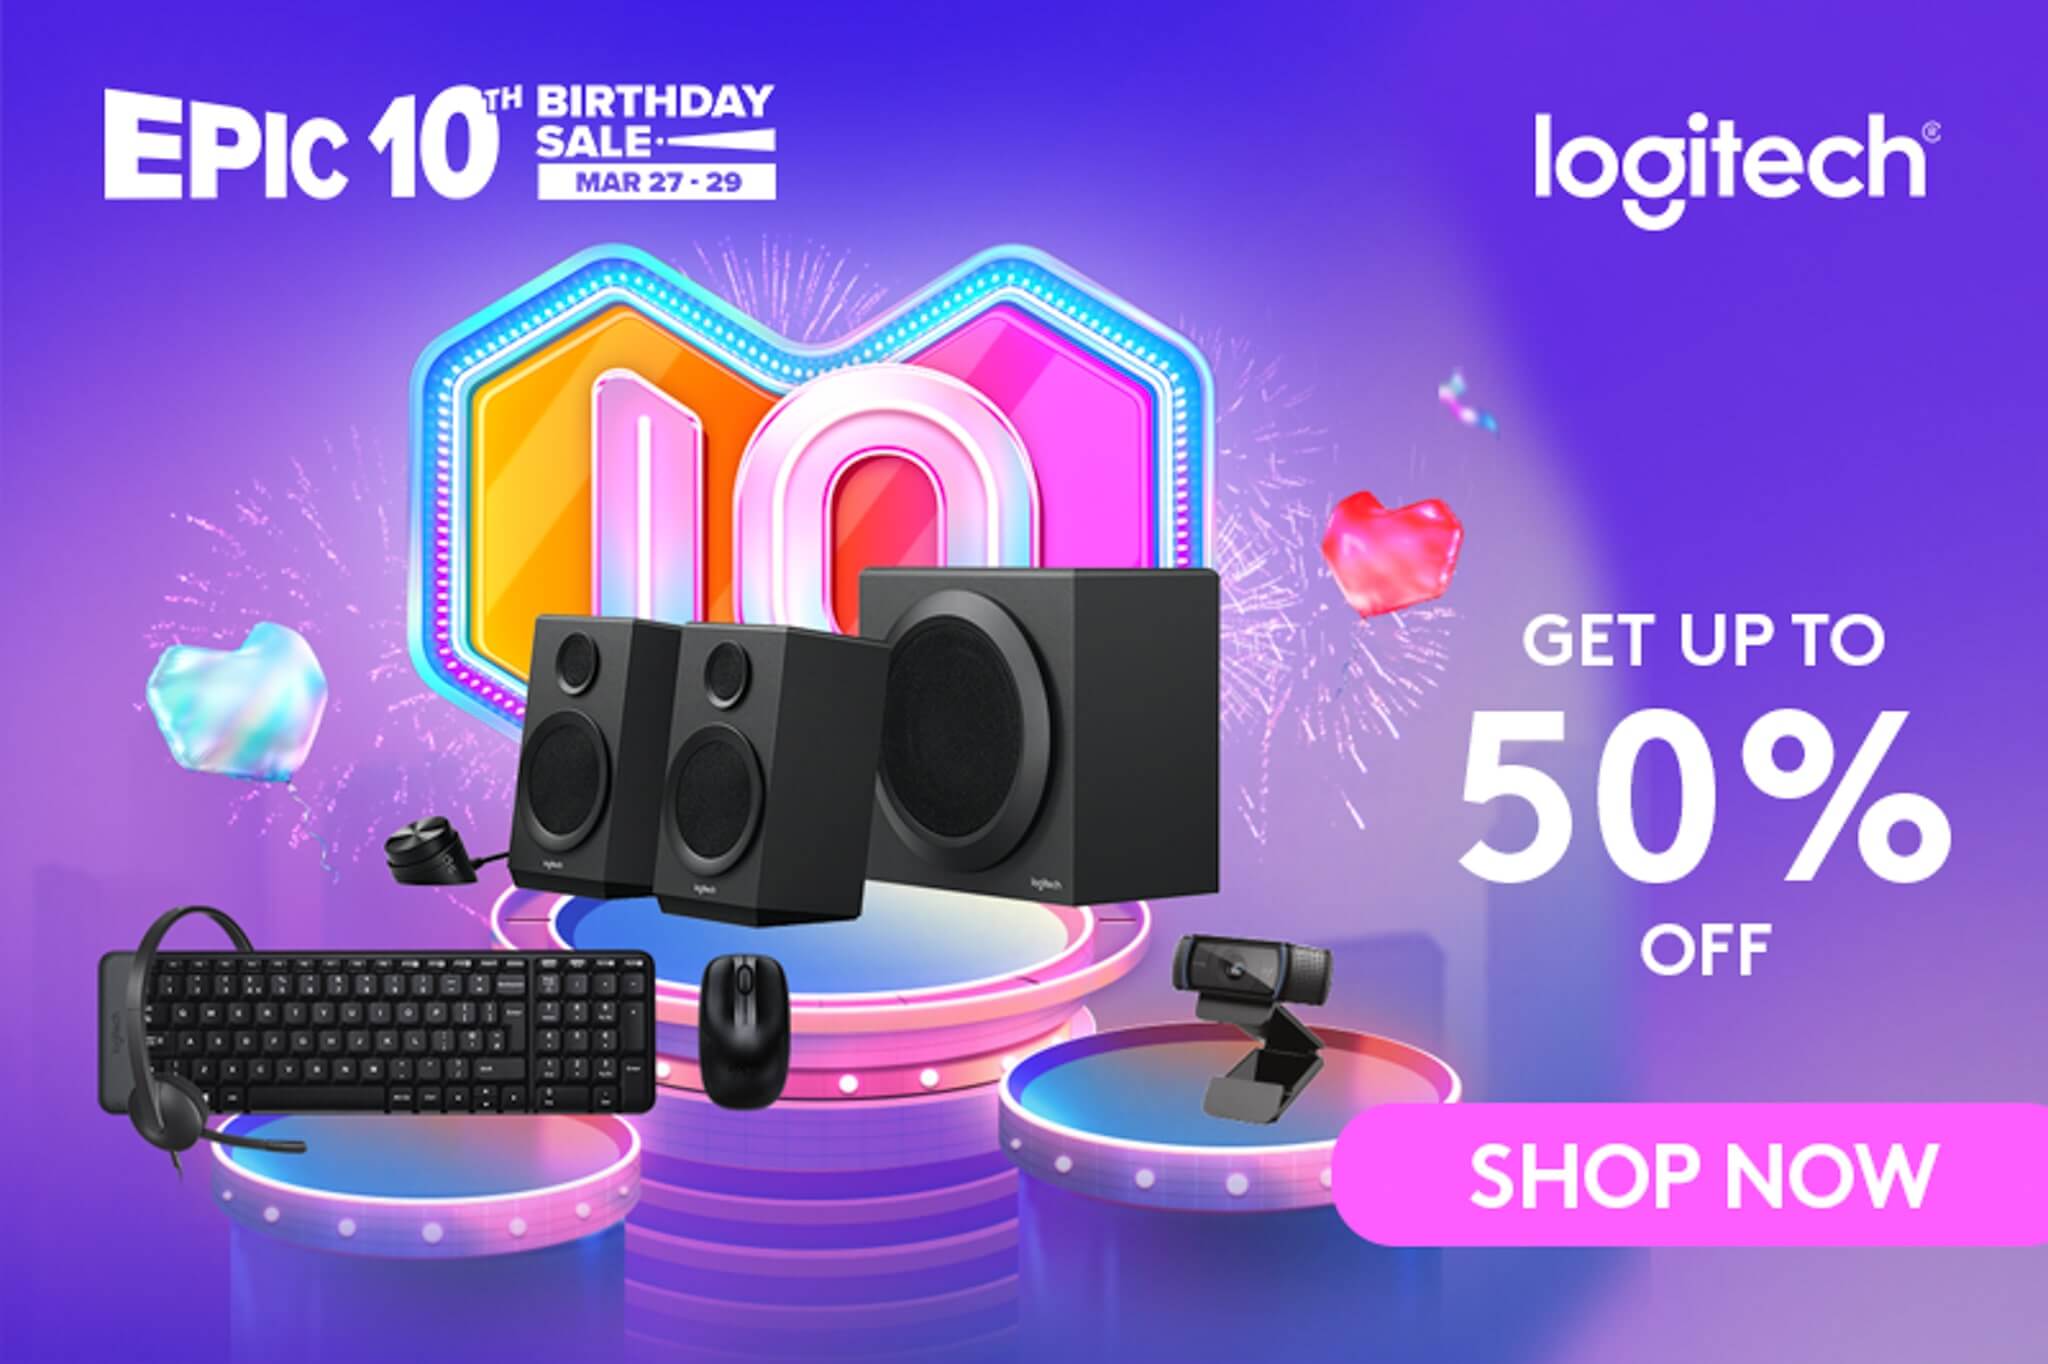 Logitech Treats You To Huge Discounts at the Lazada Epic 10th Birthday Sale